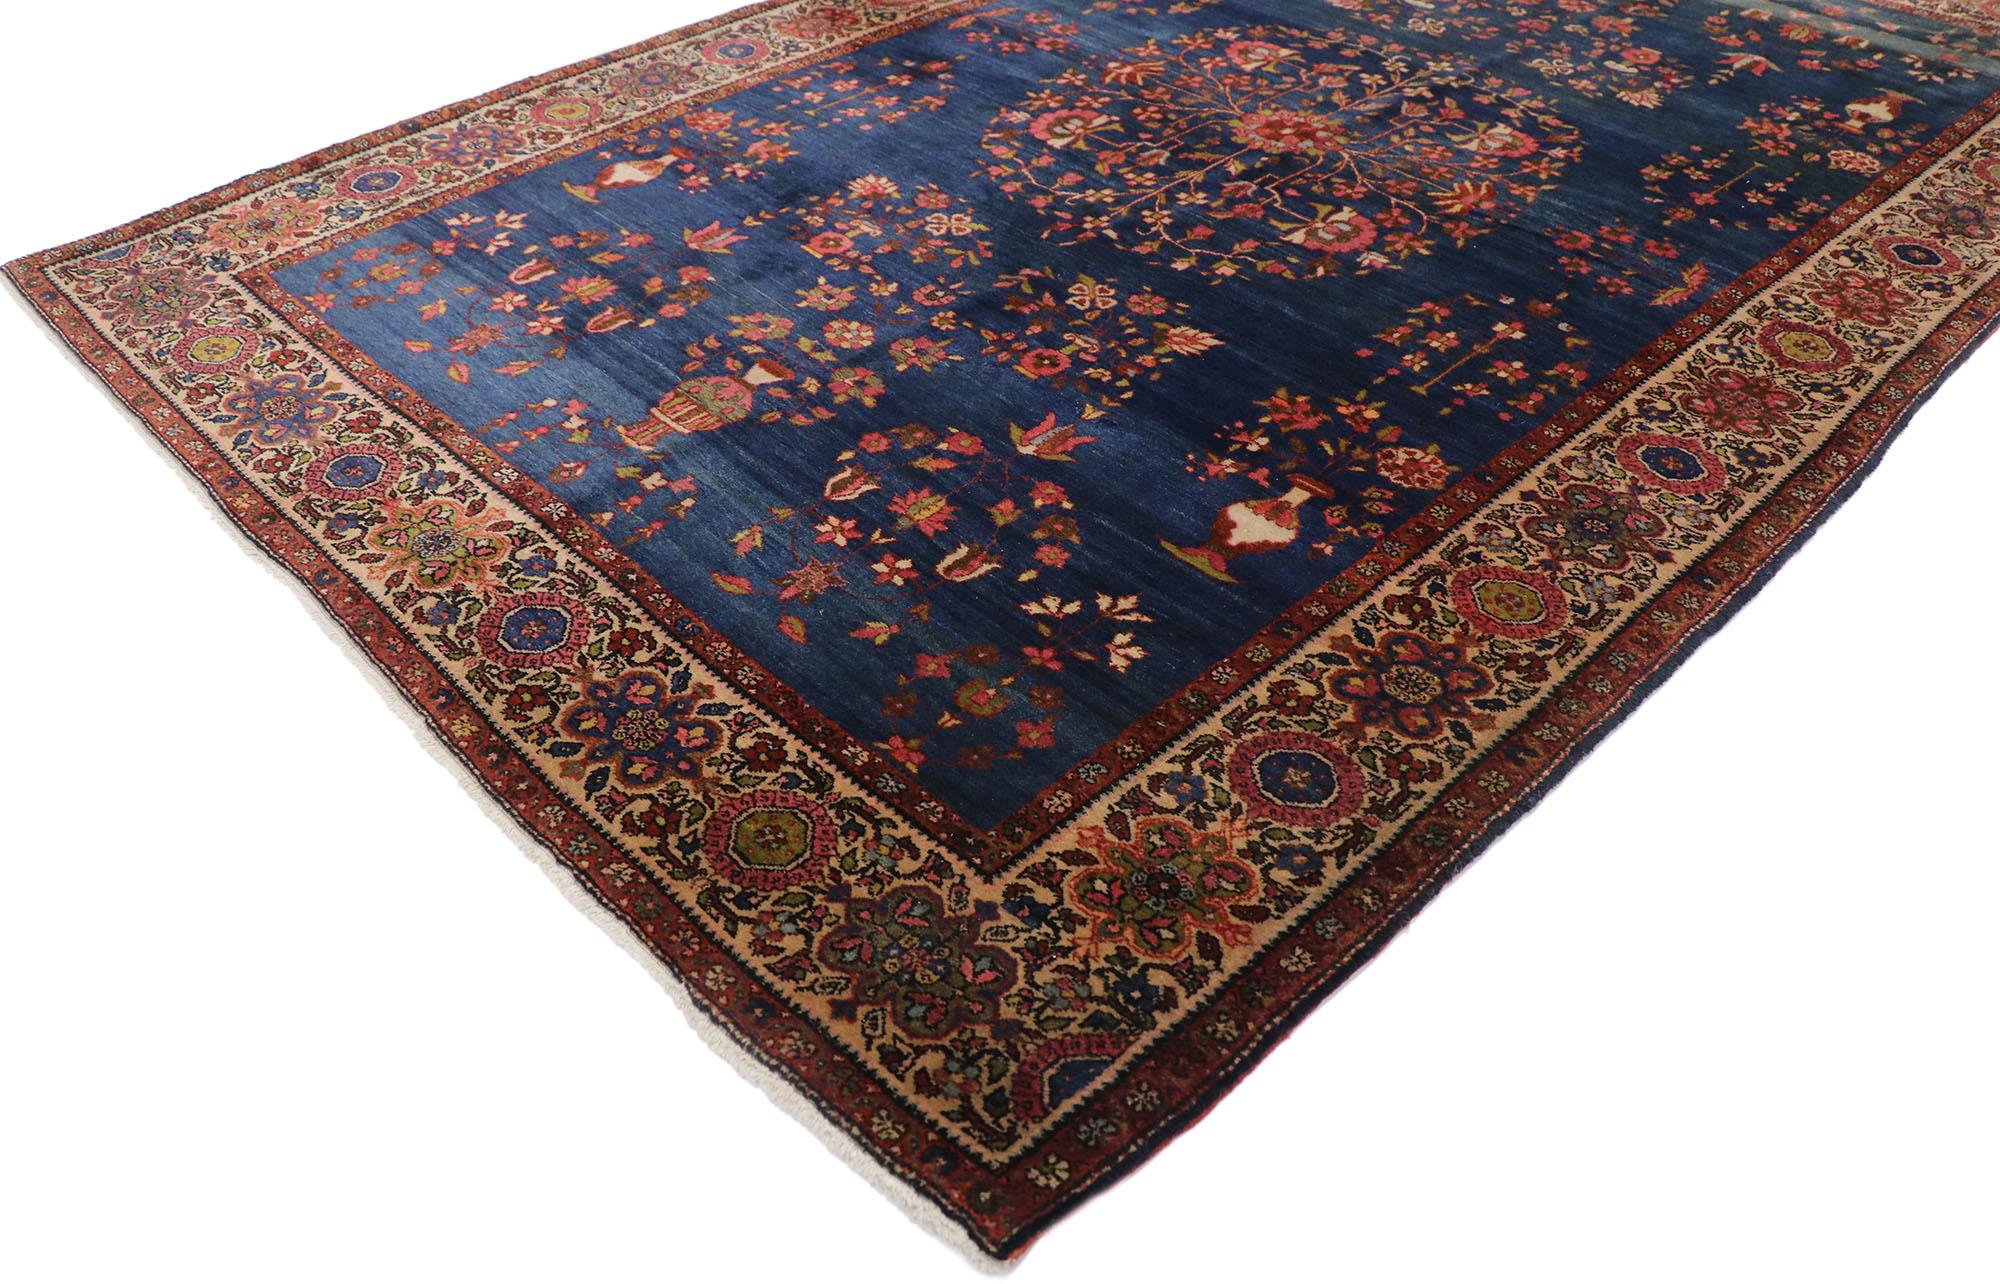 77799 Antique Persian Sarouk Farahan rug with Victorian style 04'03 x 06'06. With its beguiling beauty and rich jewel-tones, this hand-knotted wool antique Persian Sarouk rug is poised to impress. The abrashed navy blue field features an open floral